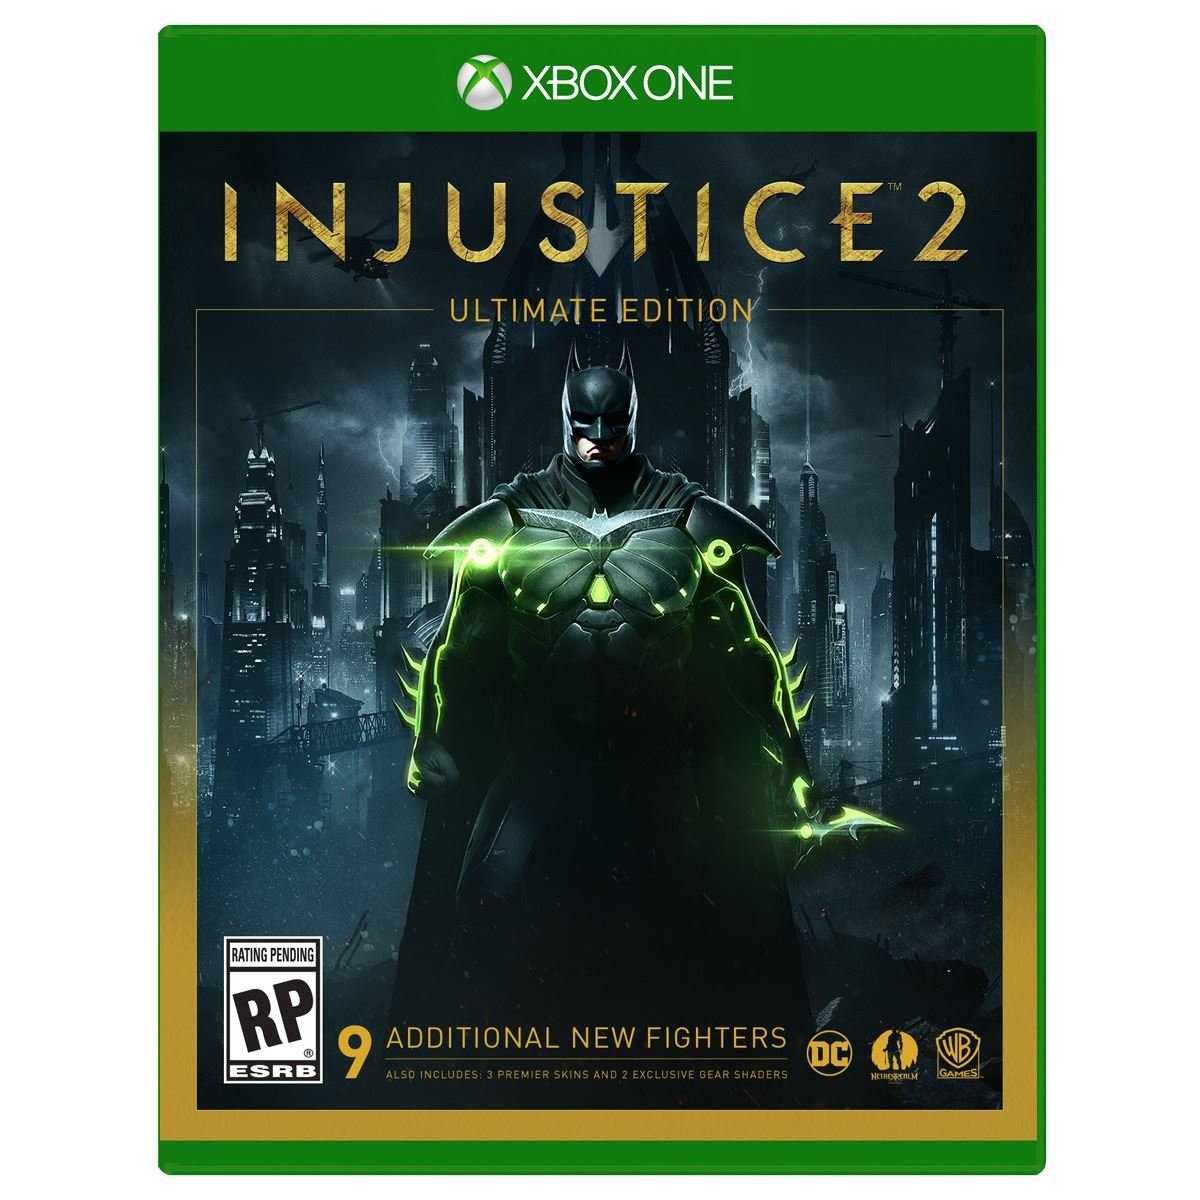 Xbox One Injustice 2 Ultimate Edition